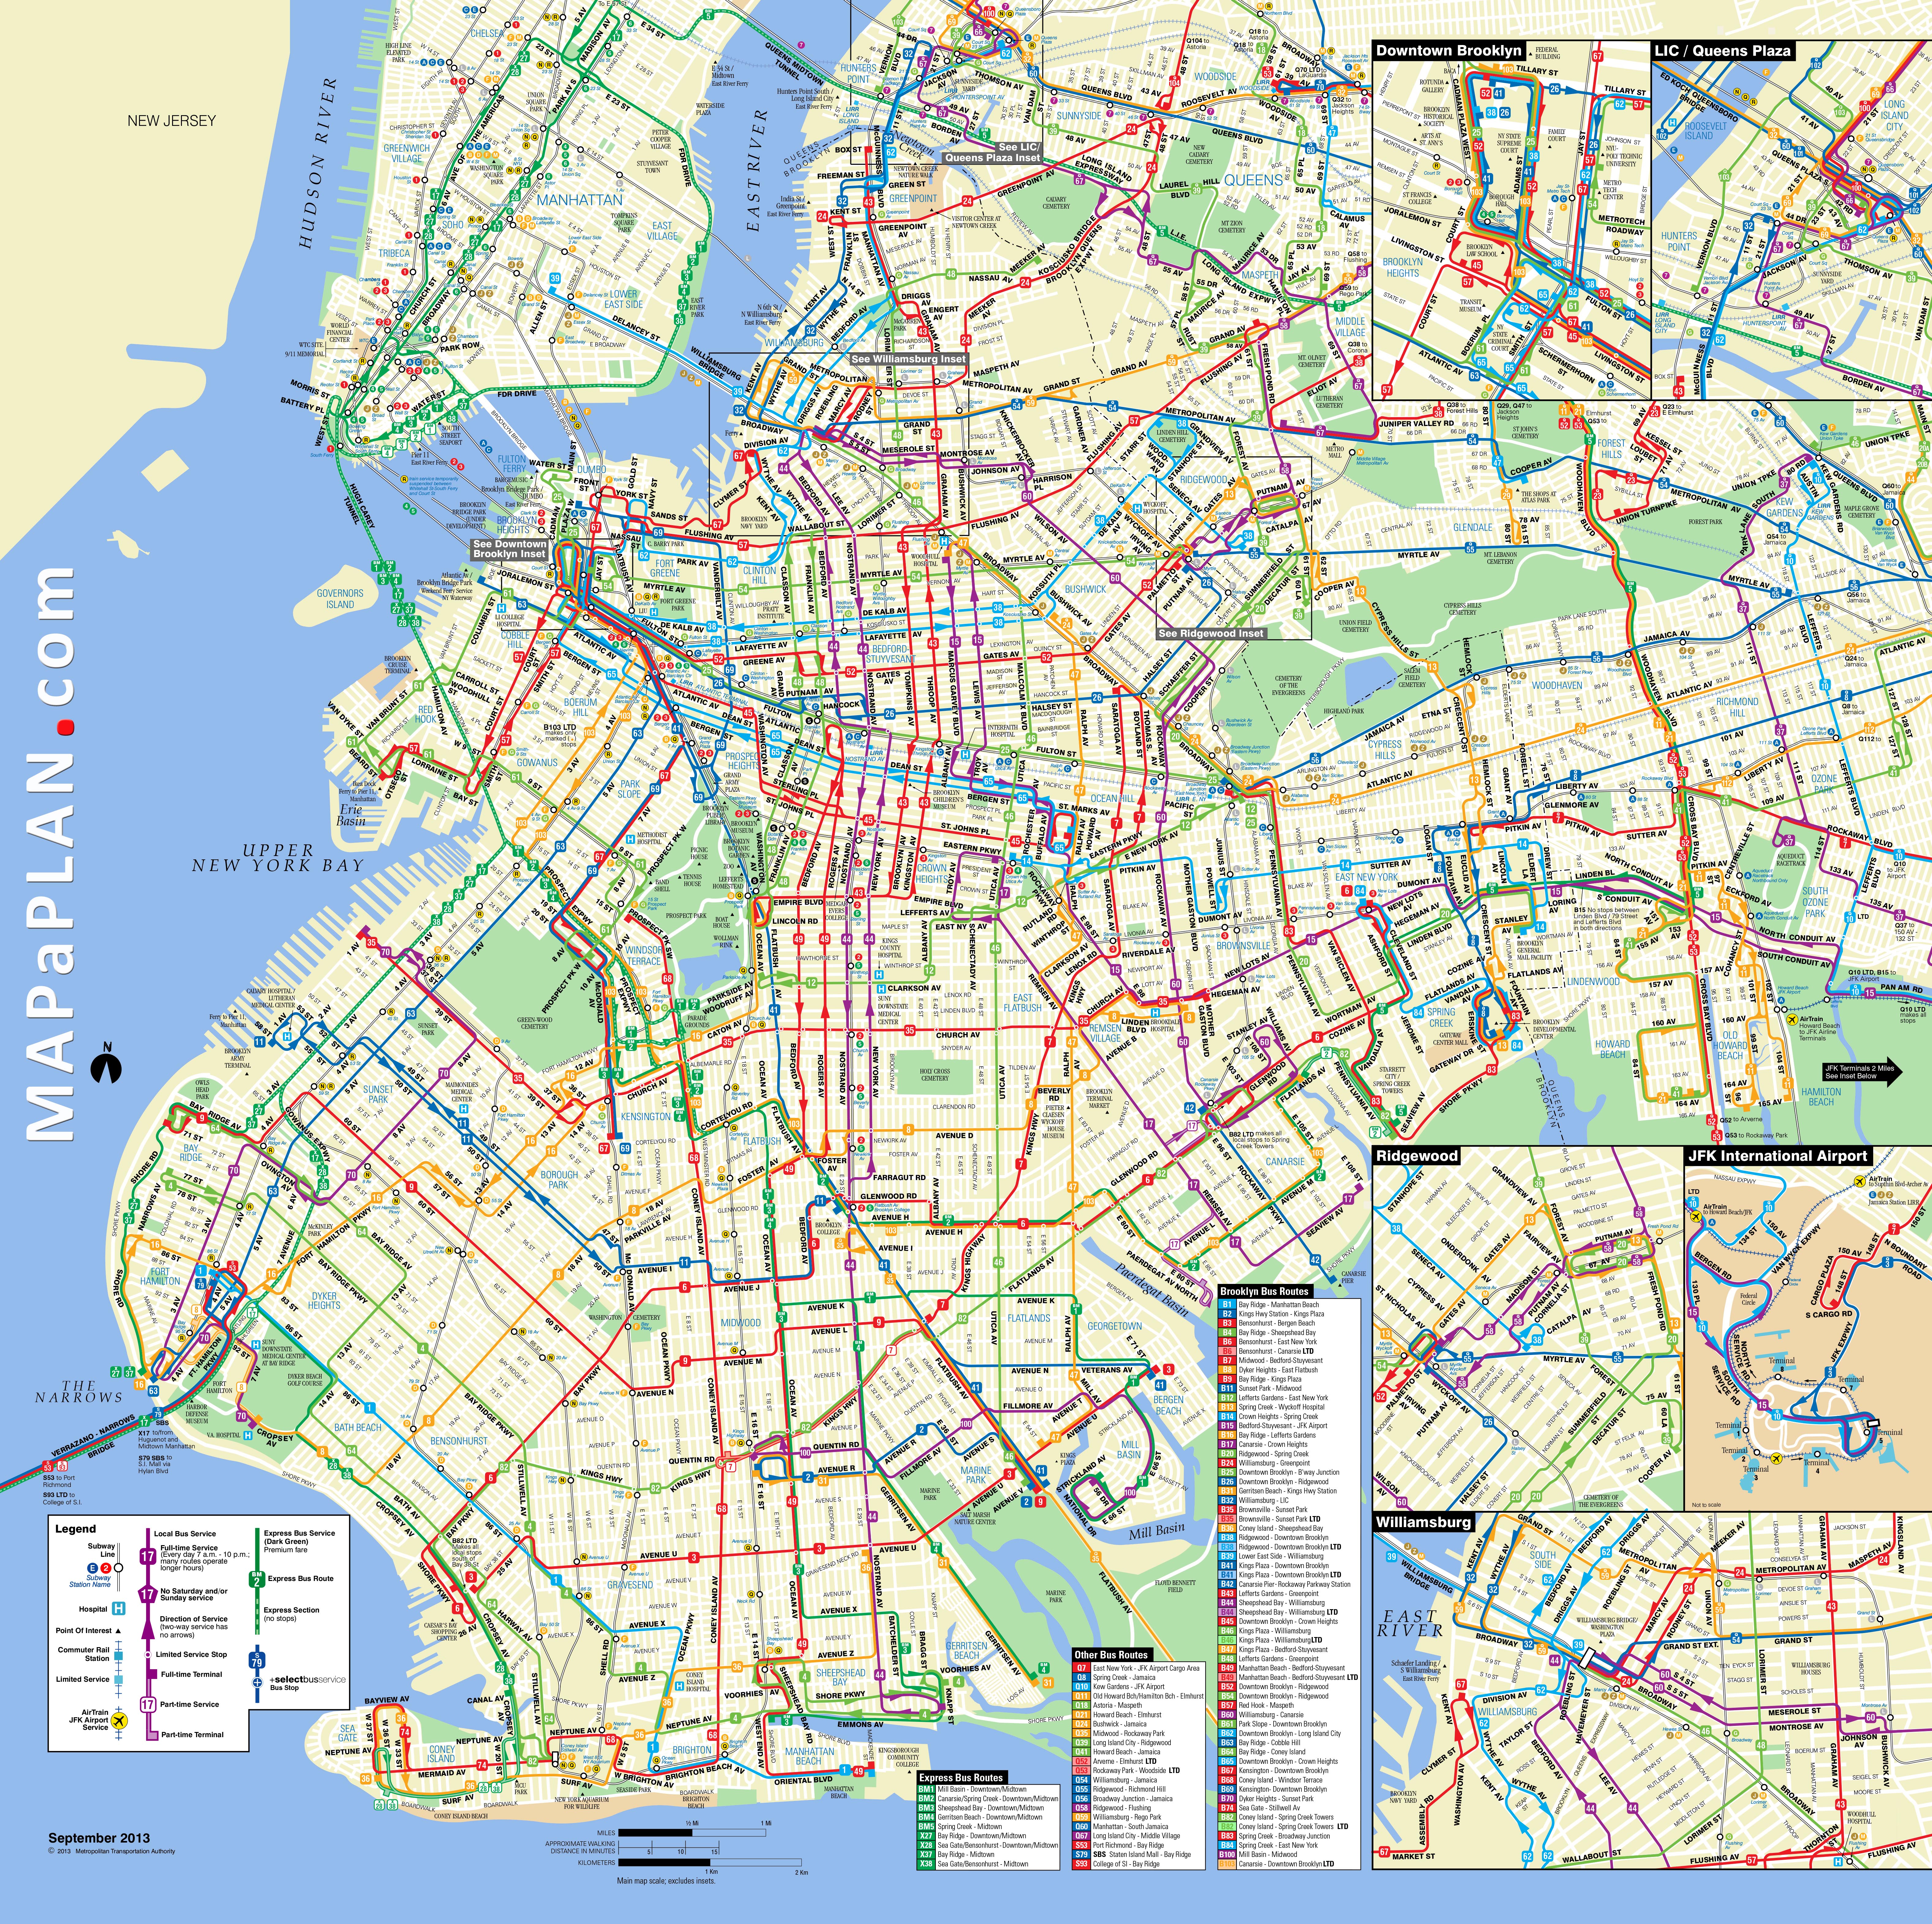 brooklyn-bus-map-new-york-top-tourist-attractions-map